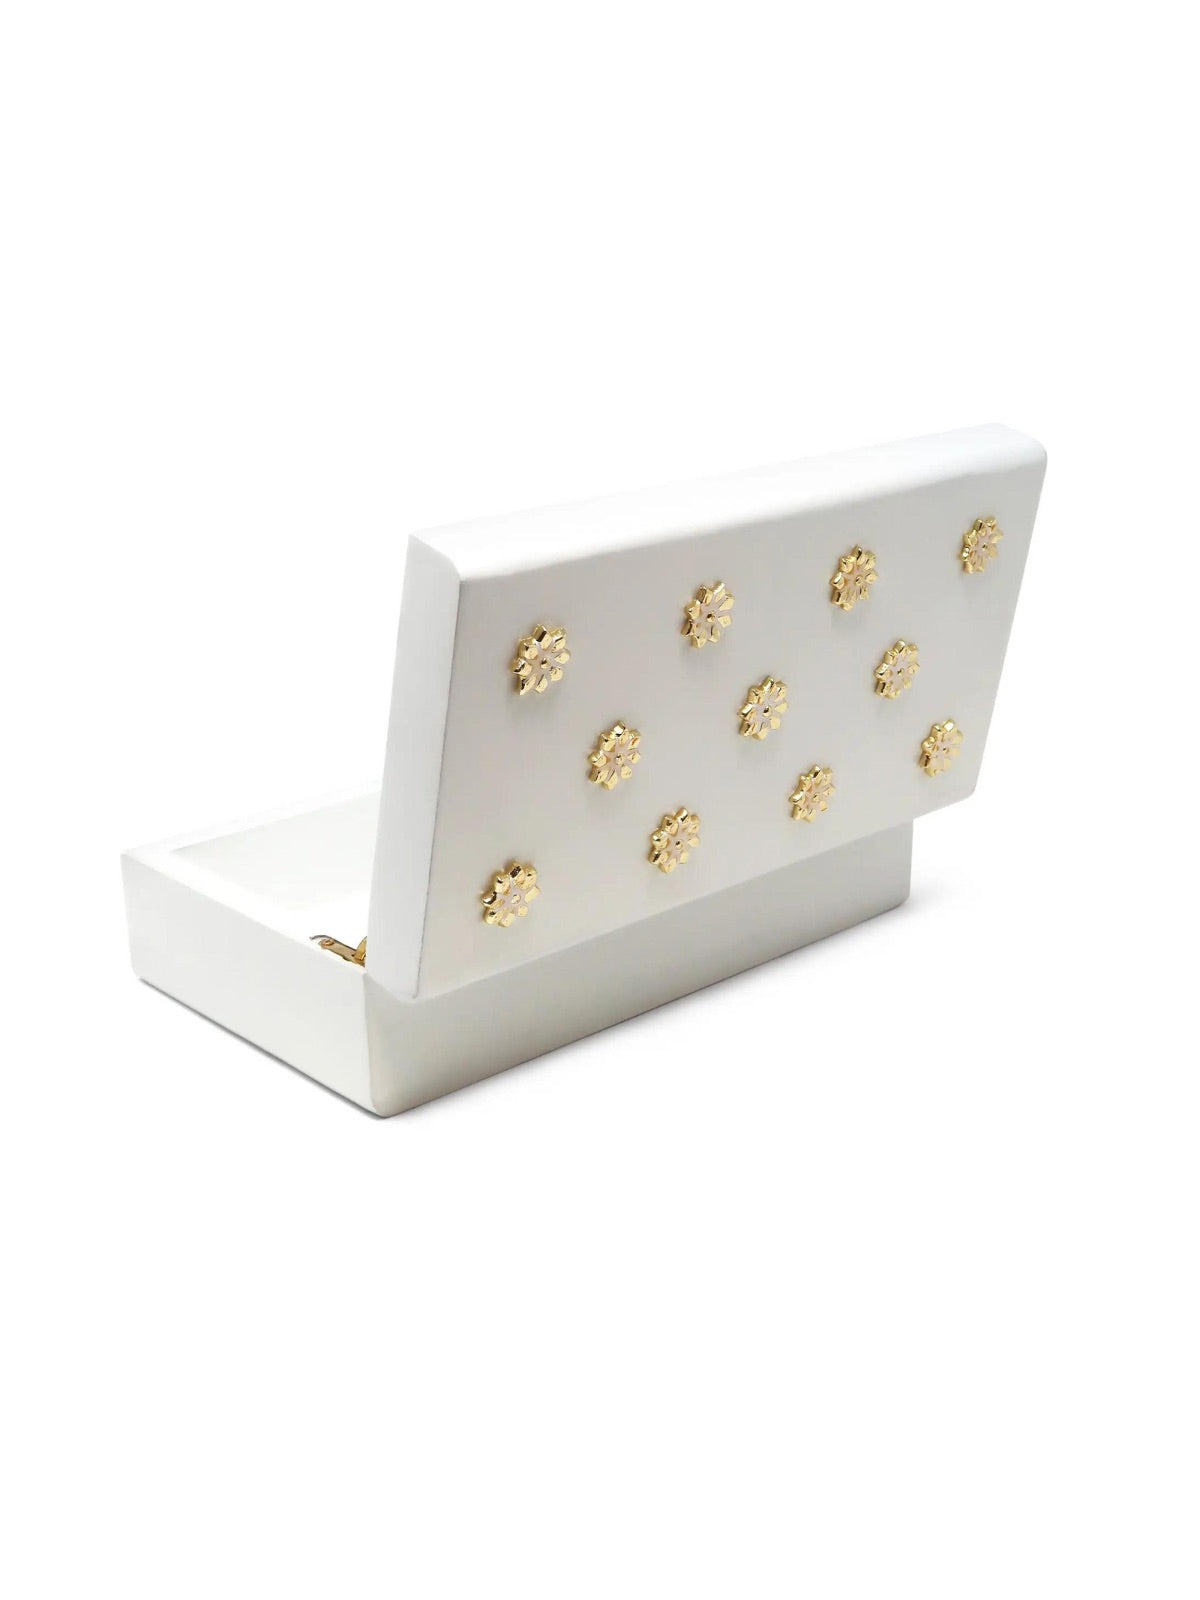 White Decorative Wooden Box with Gold Flower Beads.